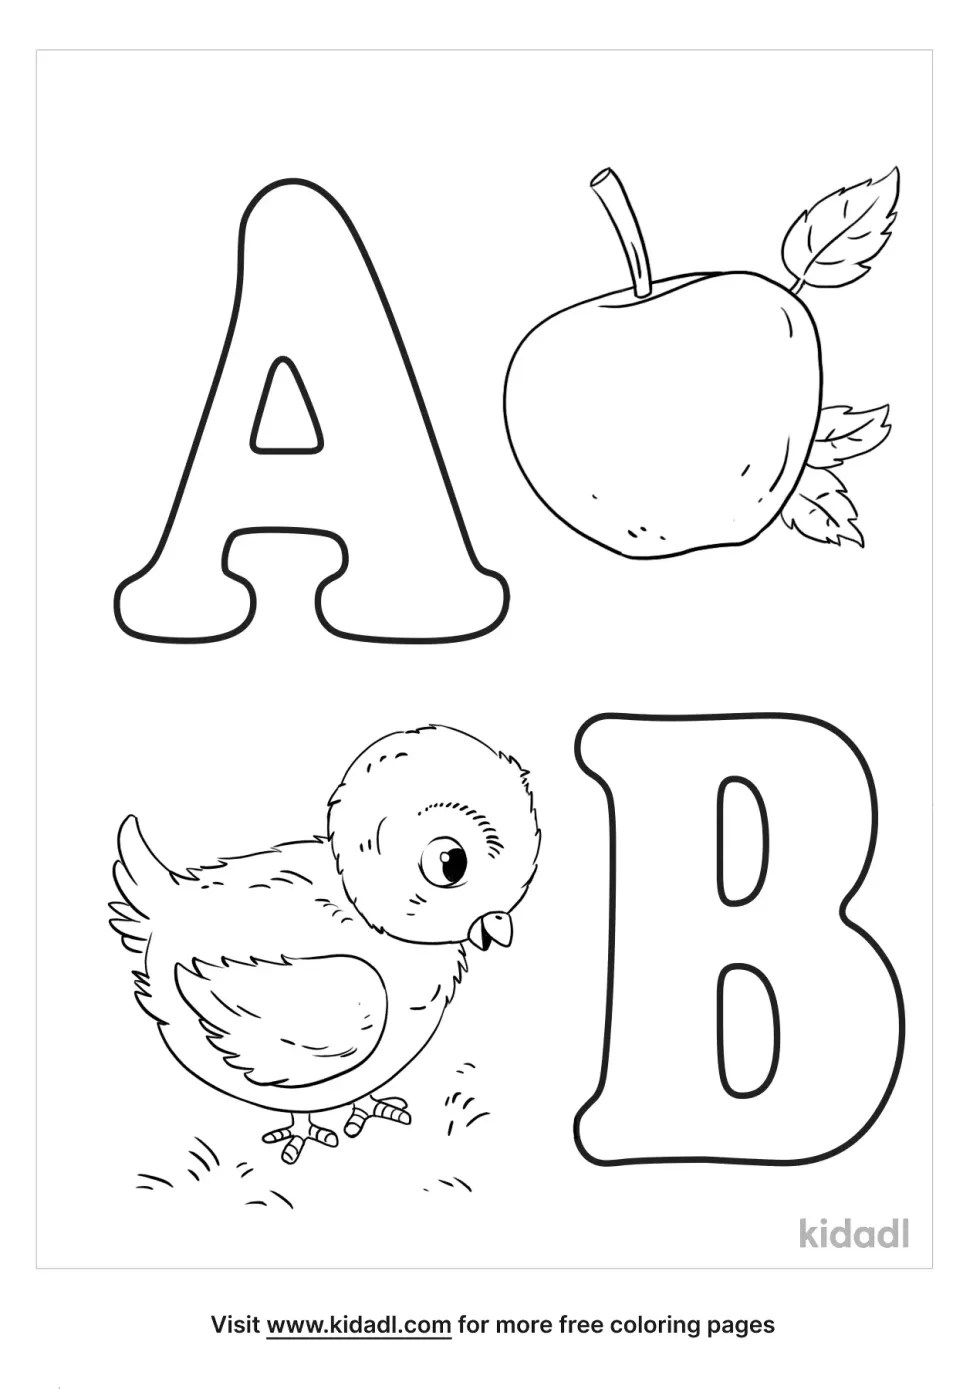 ABCs Of Salvation Coloring Page